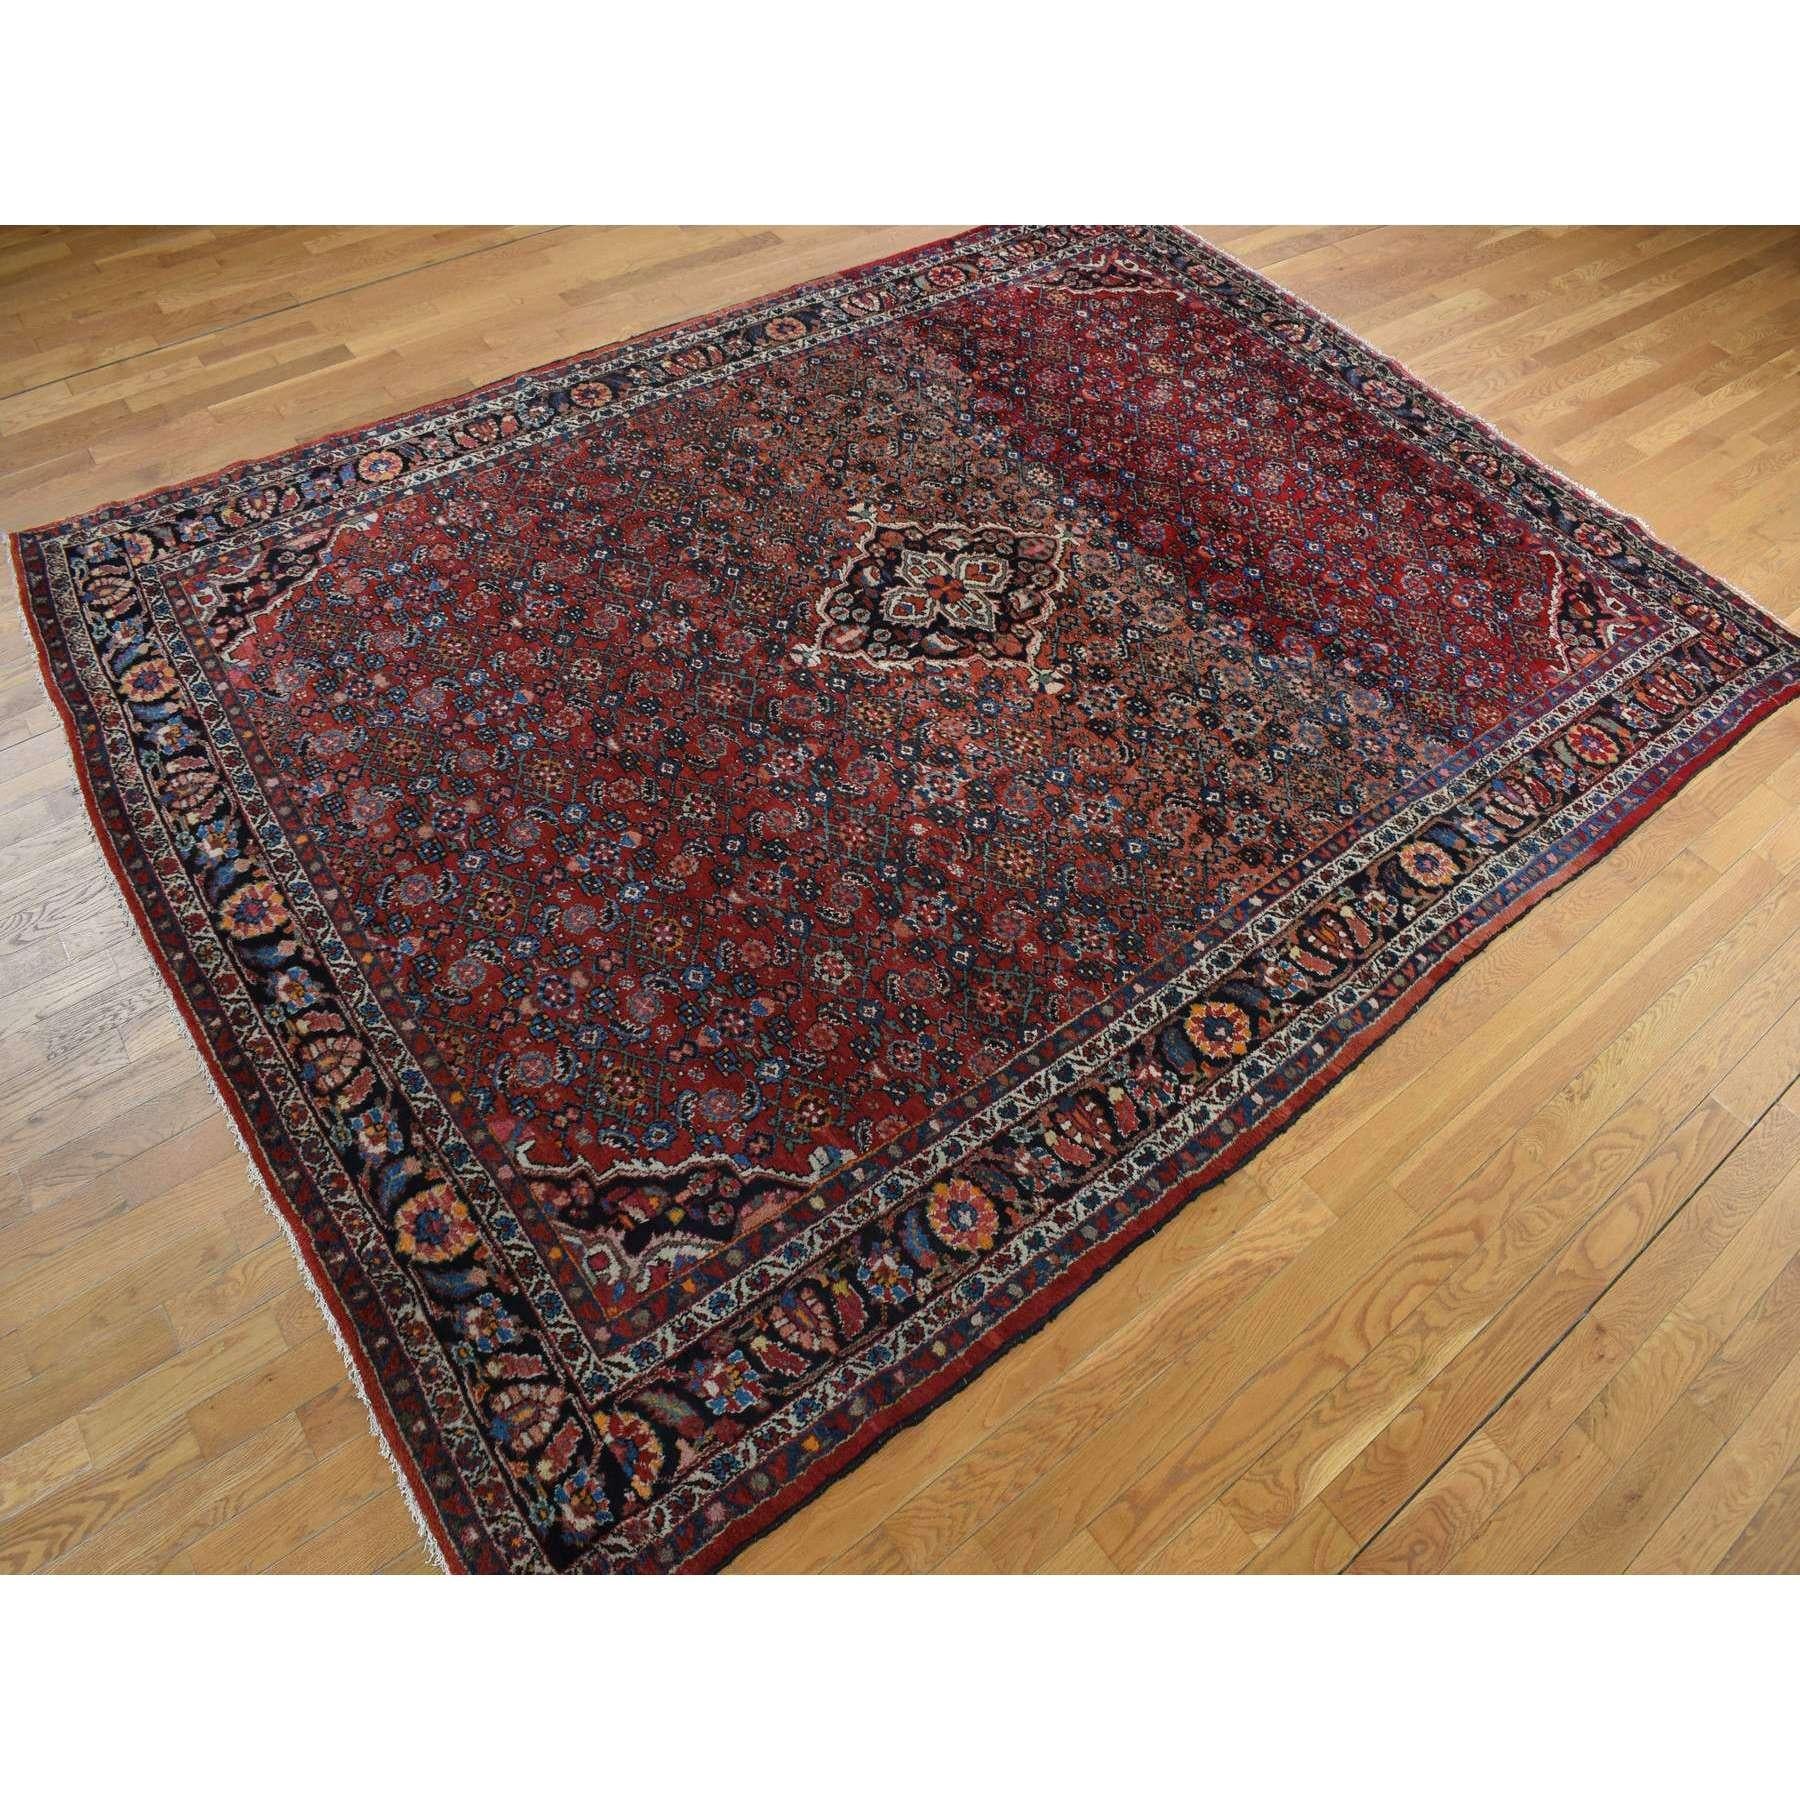 Indian Pompeian Red Hand Knotted Antique Persian Hamadan Soft Wool Clean Rug 8'5